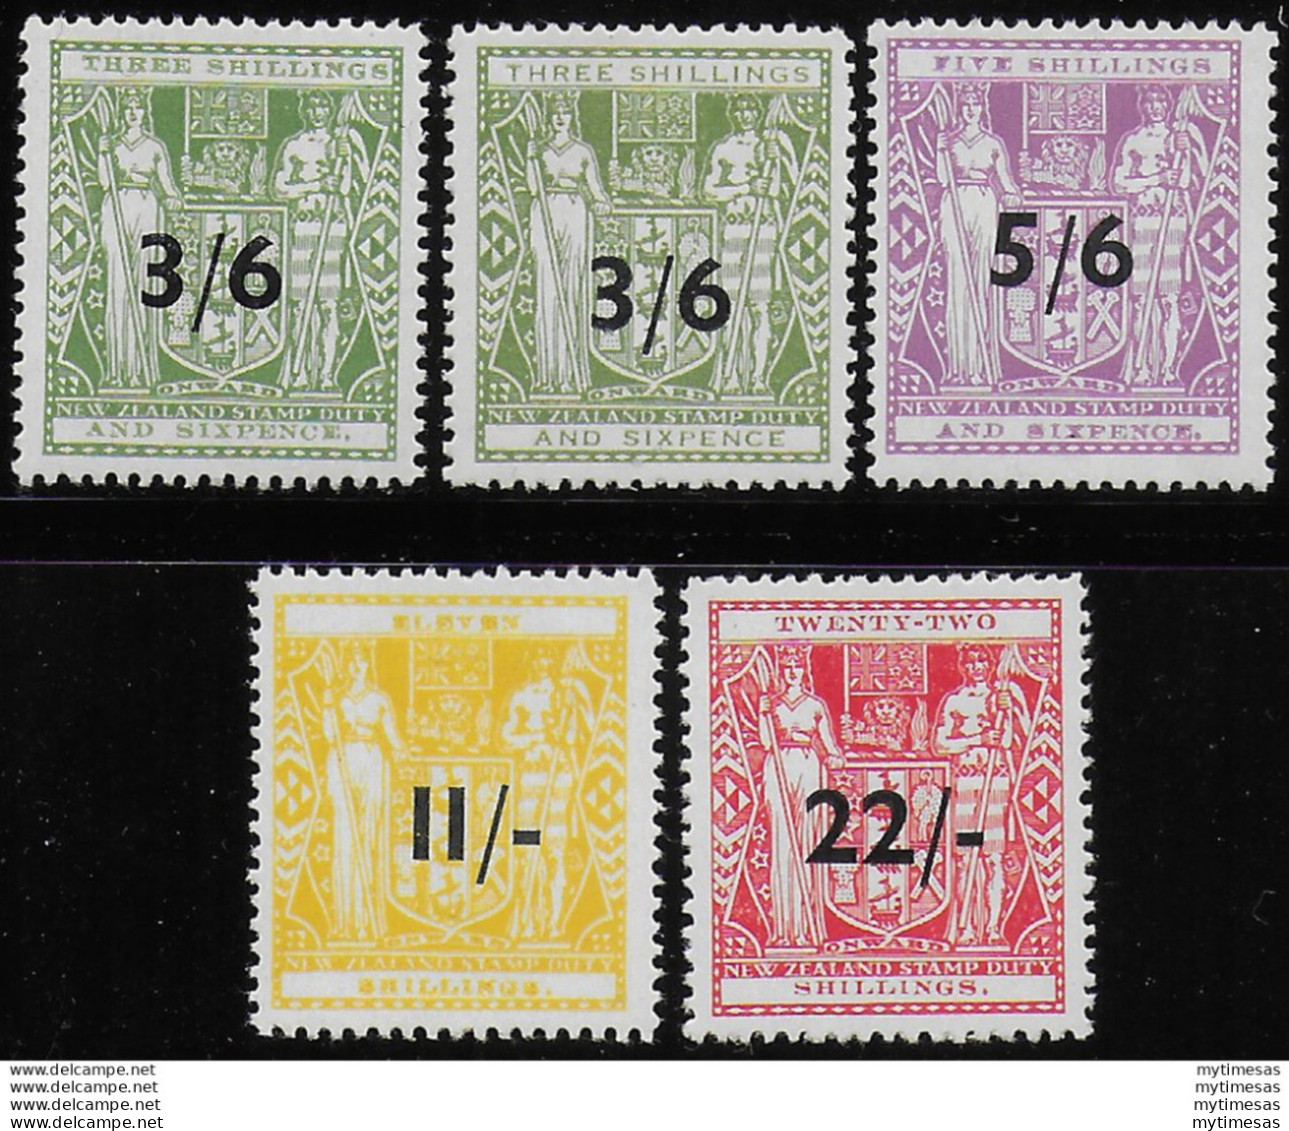 1942-50 New Zealand Fiscal Stamps 5v. MNH SG N. F212/F216 - Années Complètes